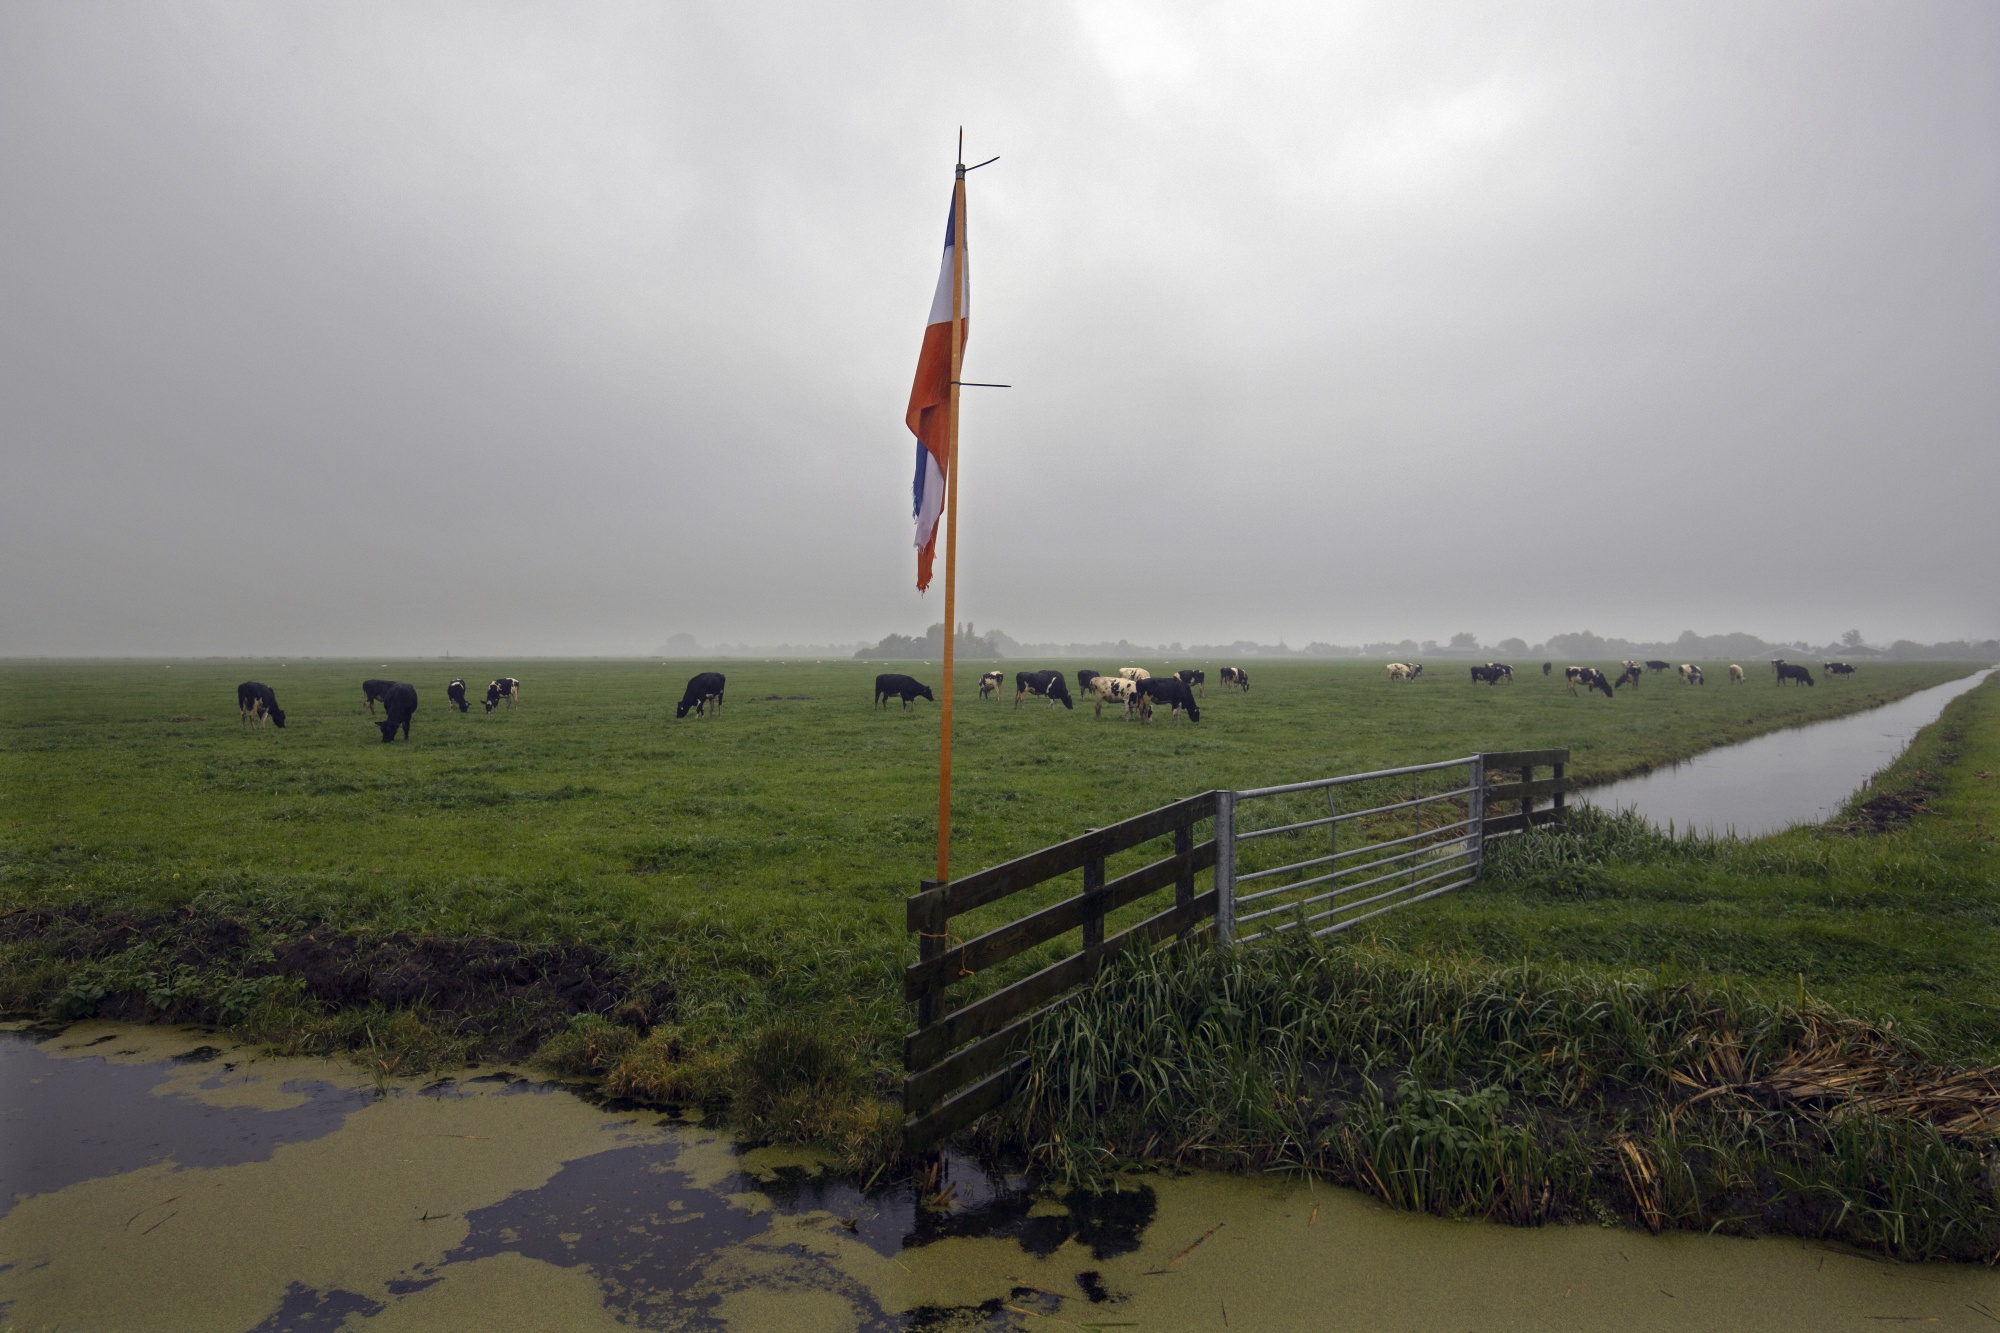 A Dutch flag flown upside down&nbsp;in protest against the government's nitrogen policy&nbsp;on a farm in Hazerswoude, Netherlands.